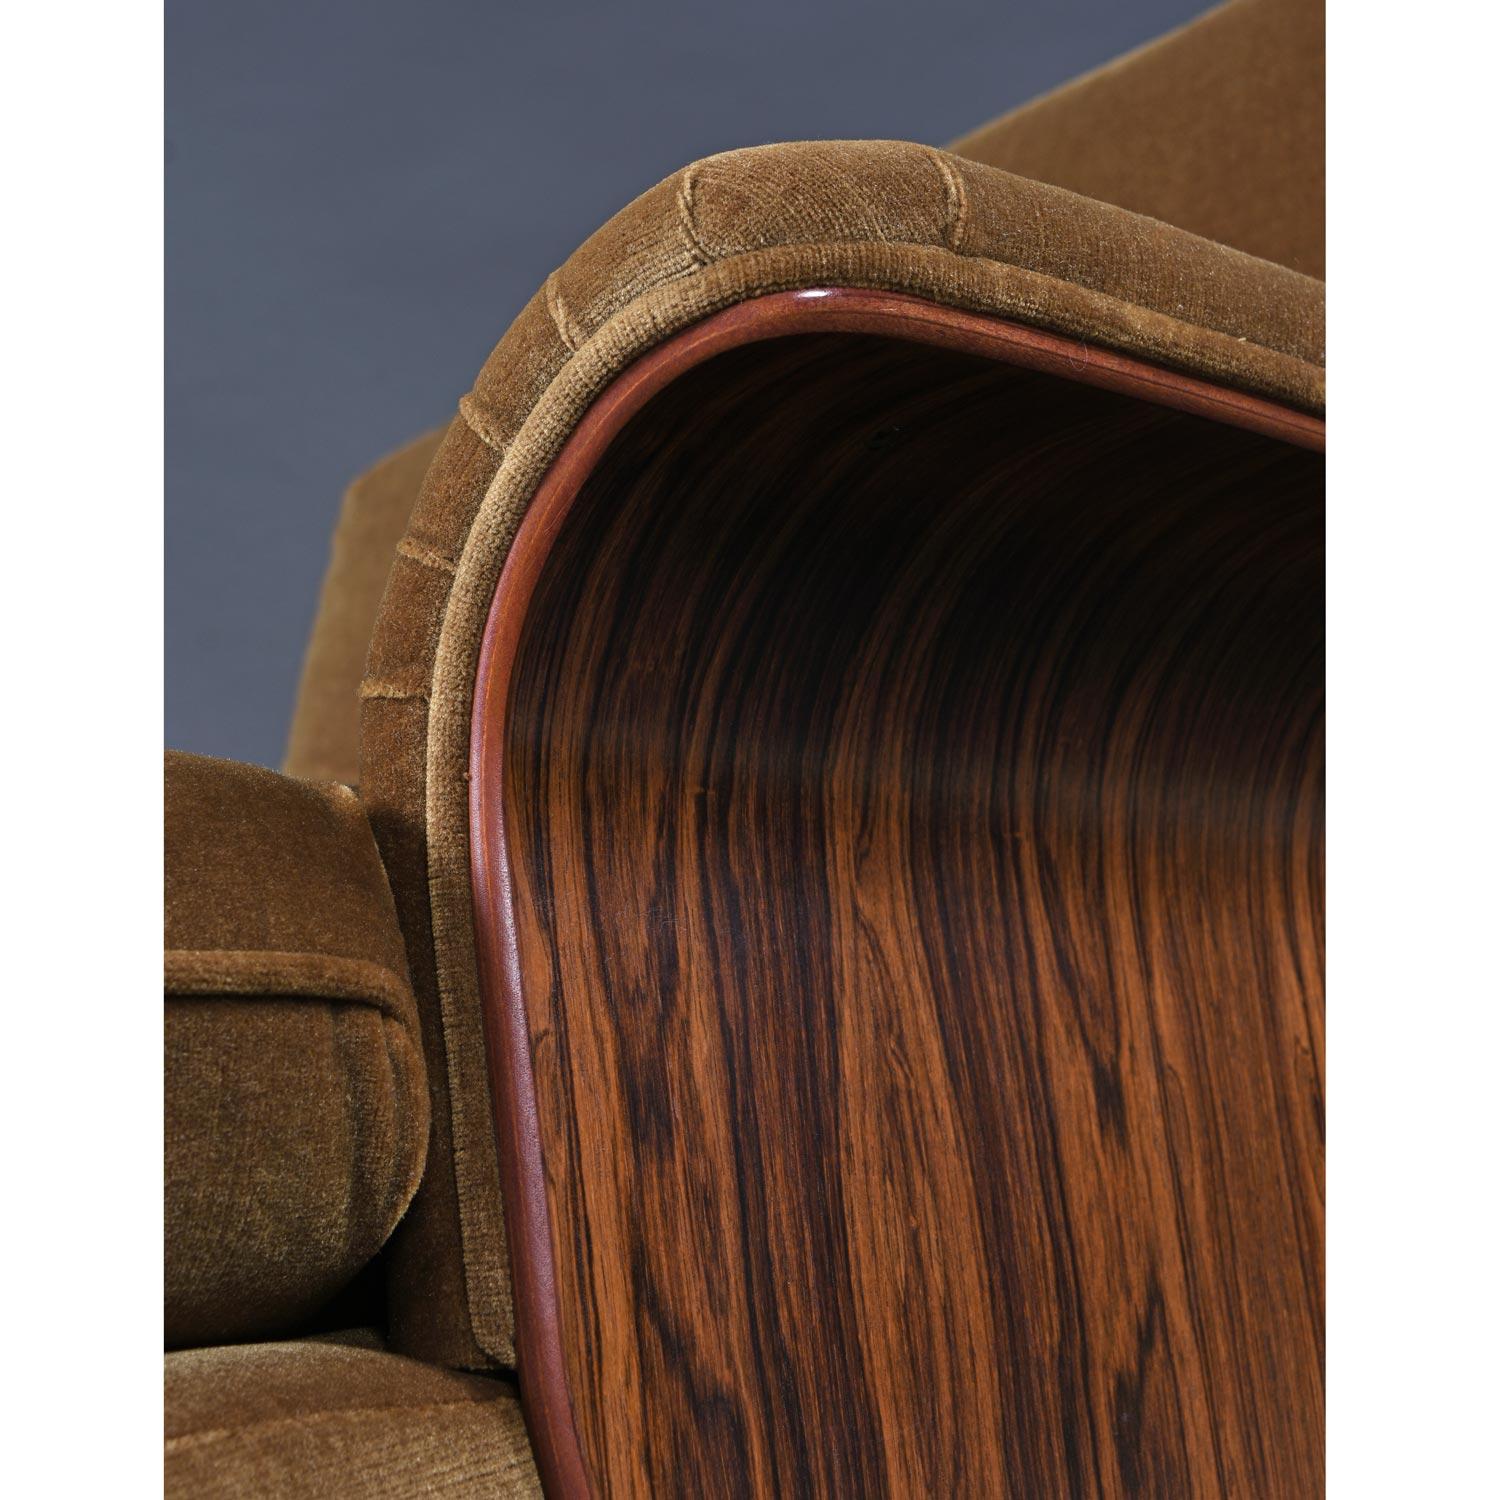 Tulip Group Lounge Chairs in Rosewood by K M Wilkins for G-Plan of England For Sale 4